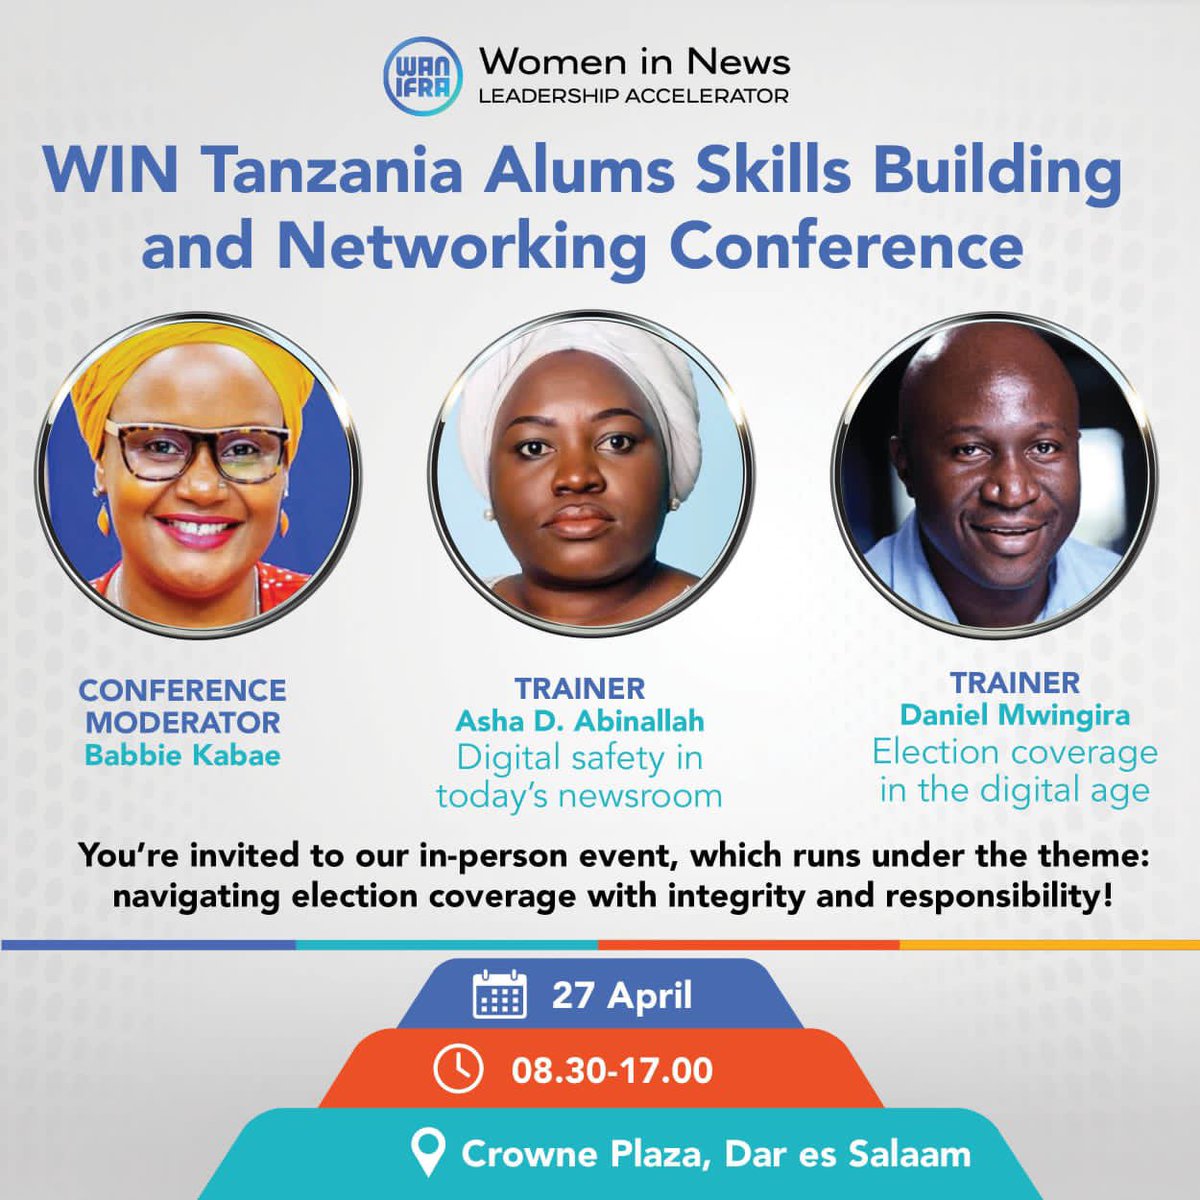 Leveraging on her Expertise in MIL, our CEO Asha Abinallah (@AD_Abinallah) together with Daniel Mwingira from @NuktaAfrica will be among the facilitators of the WAN-IFRA WIN leadership accelerator programme for high potential media women, to equip them with knowledge and skills.